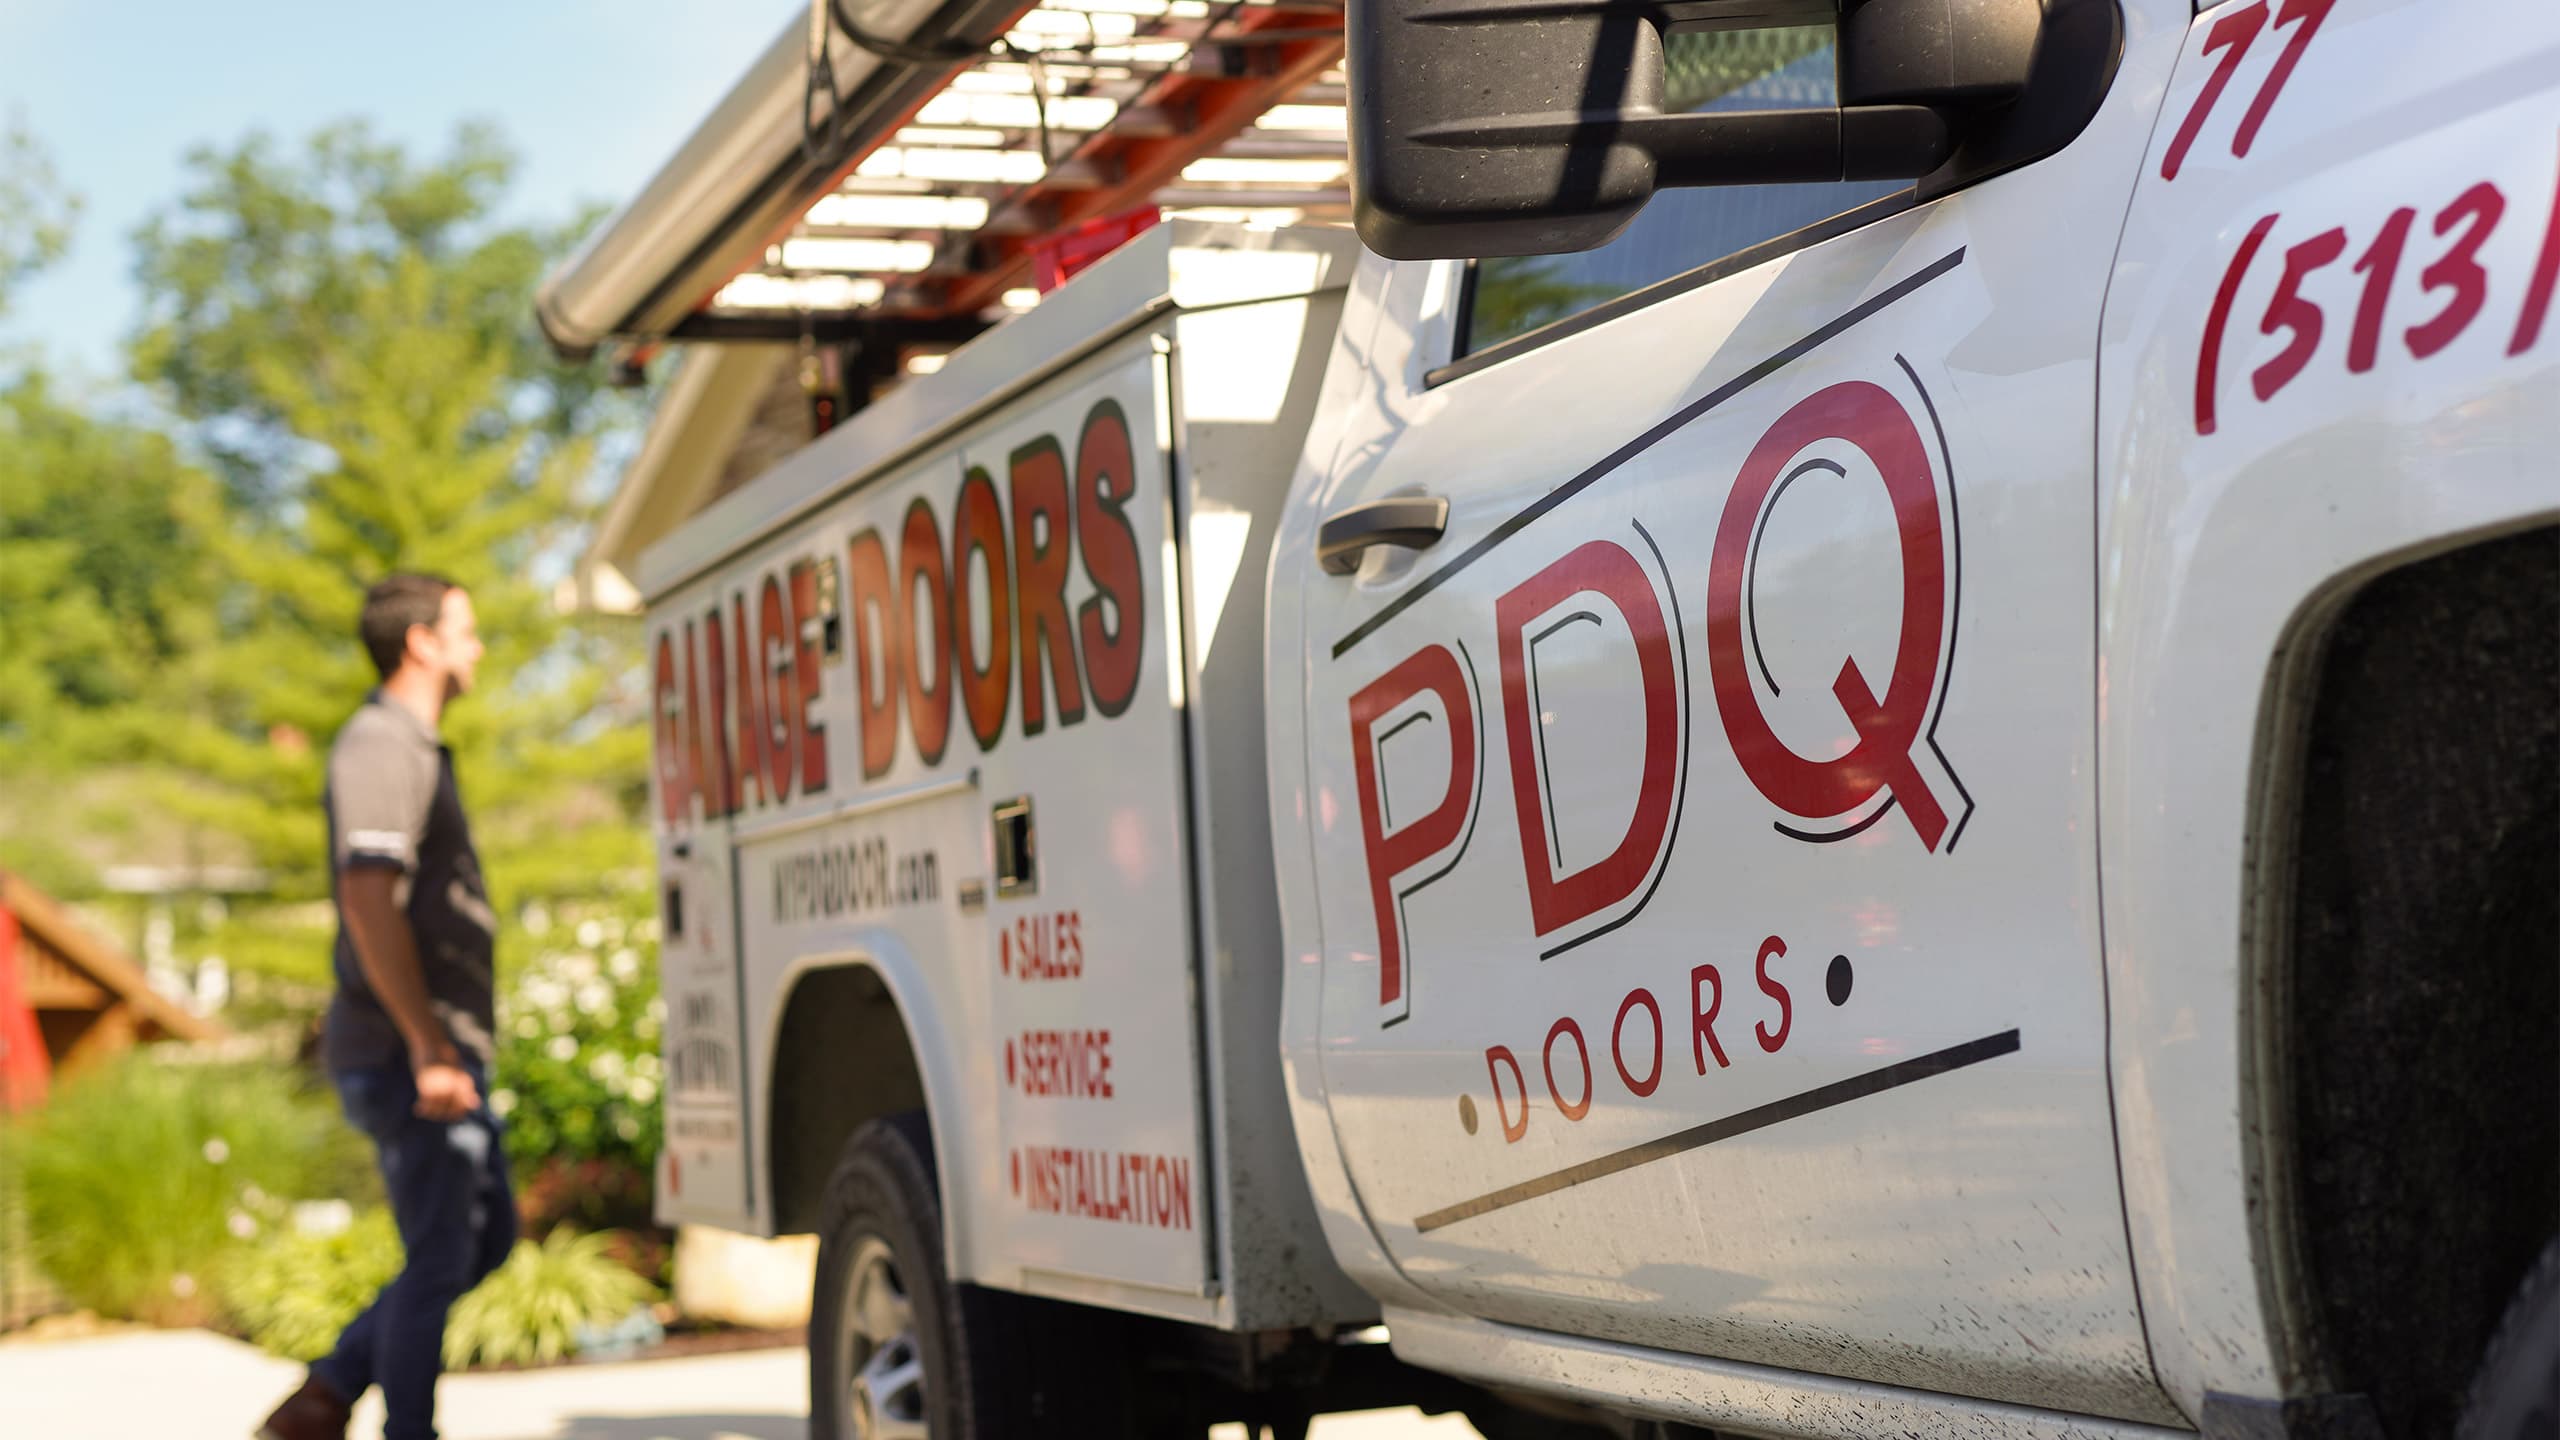 A white PDQ Doors service and installation truck parked in a driveway with a PDQ Doors technician in the background